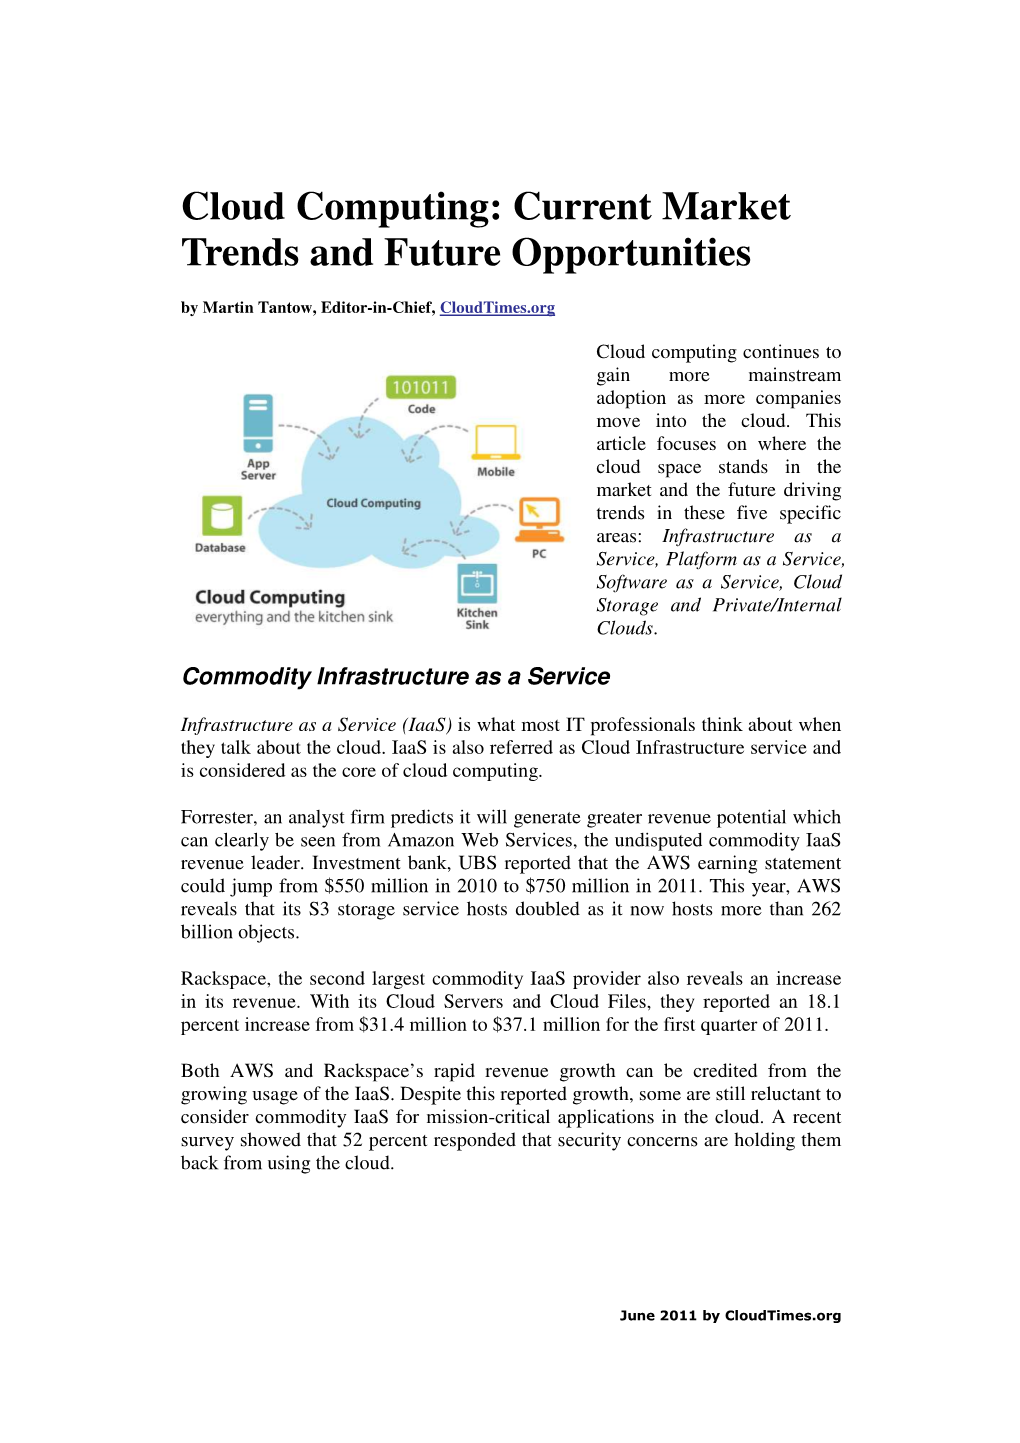 Cloud Computing Current Market Trends and Future Opportunities